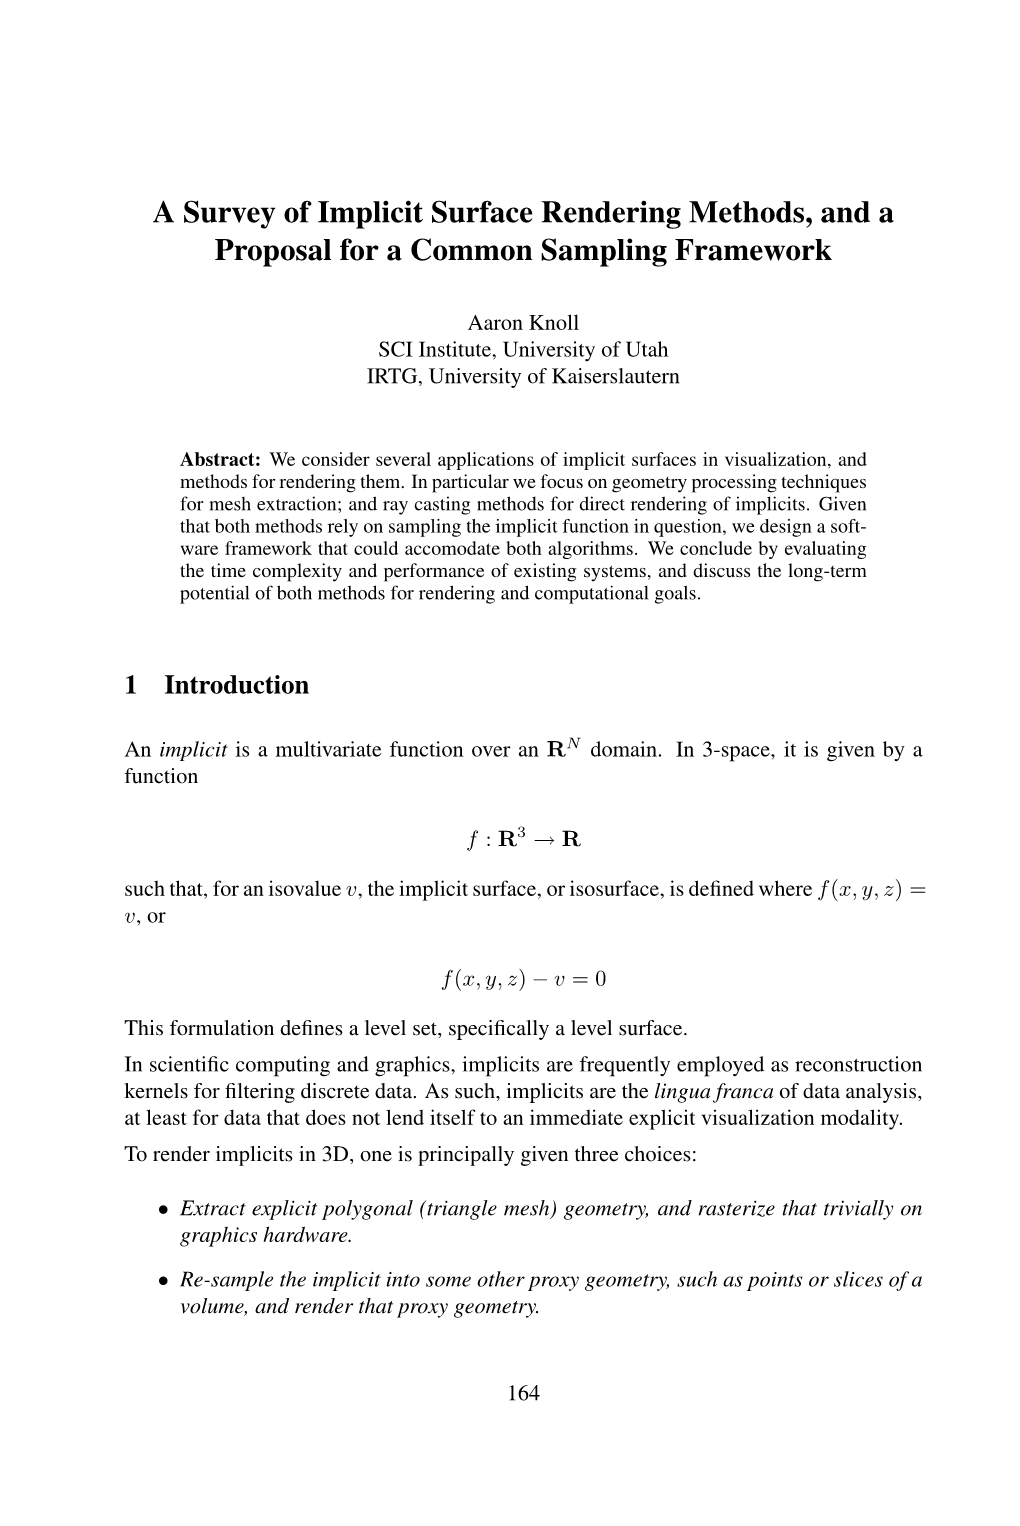 A Survey of Implicit Surface Rendering Methods, and a Proposal for A